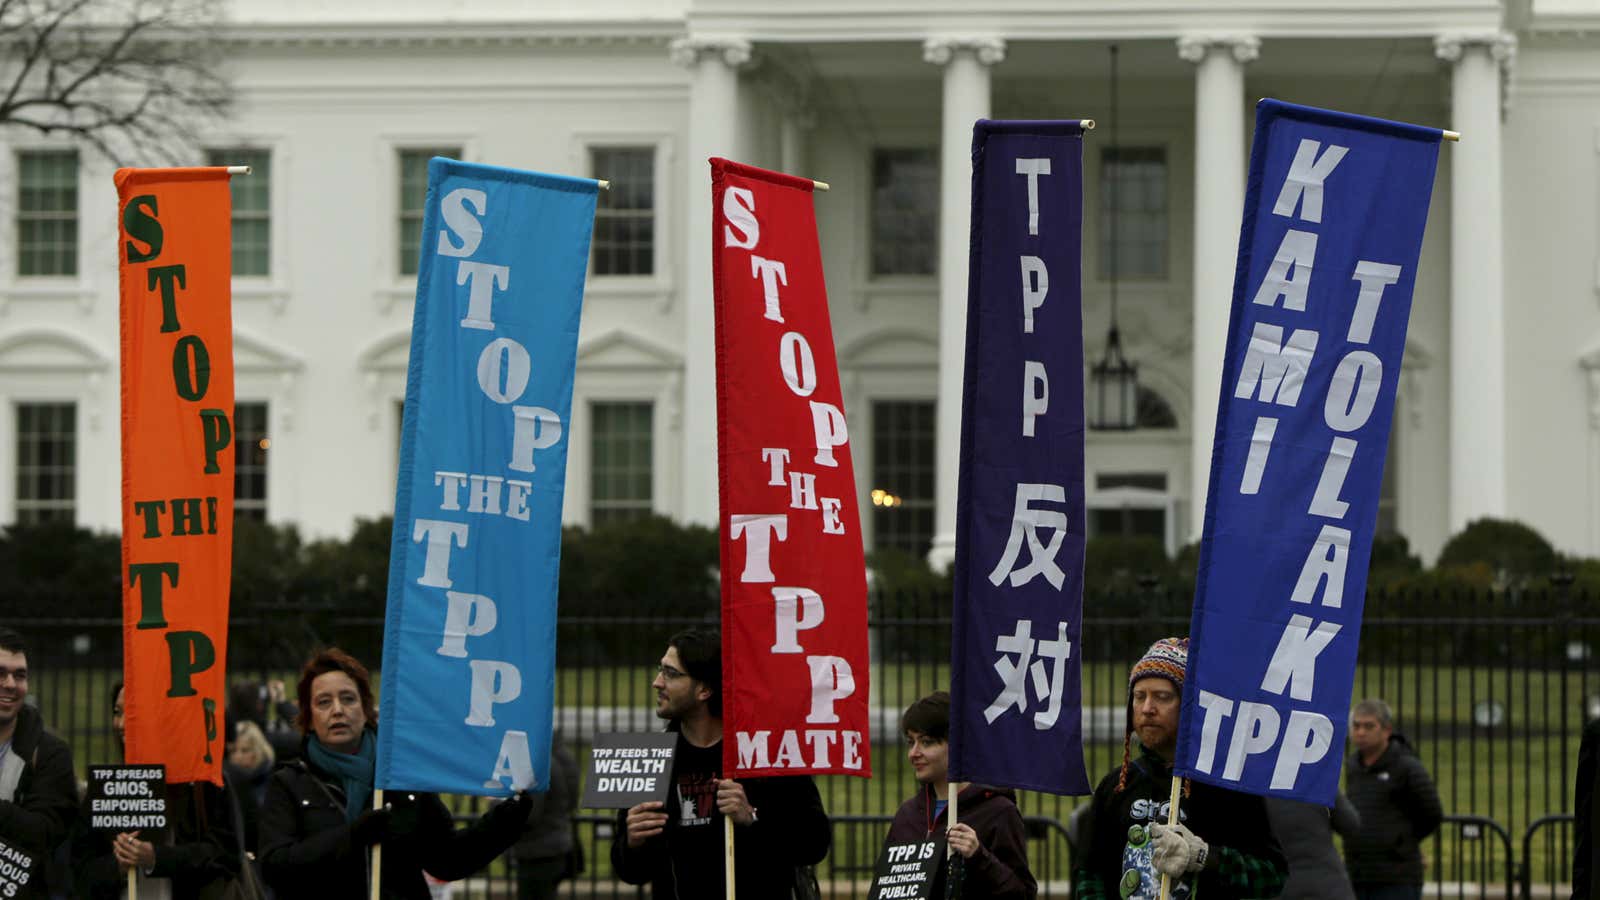 Down with TPP (yeah you know me).